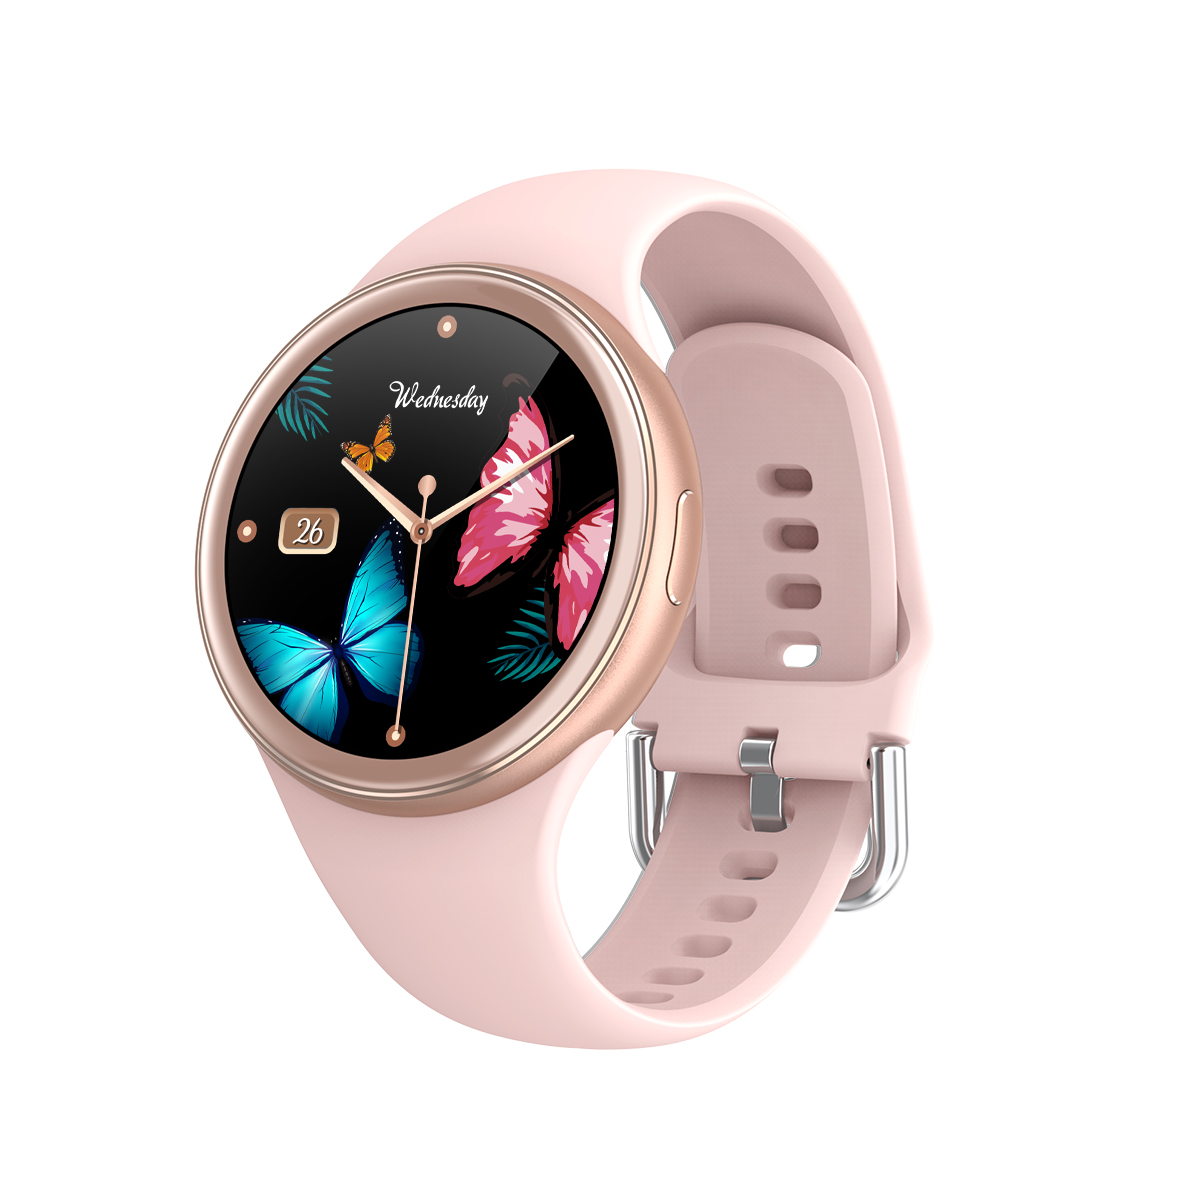 Gaminol - Q57 smartwatch 1.09inch touch screen Blood pressure Custom dial heart rate message push sport watches fitness smart watch Round model